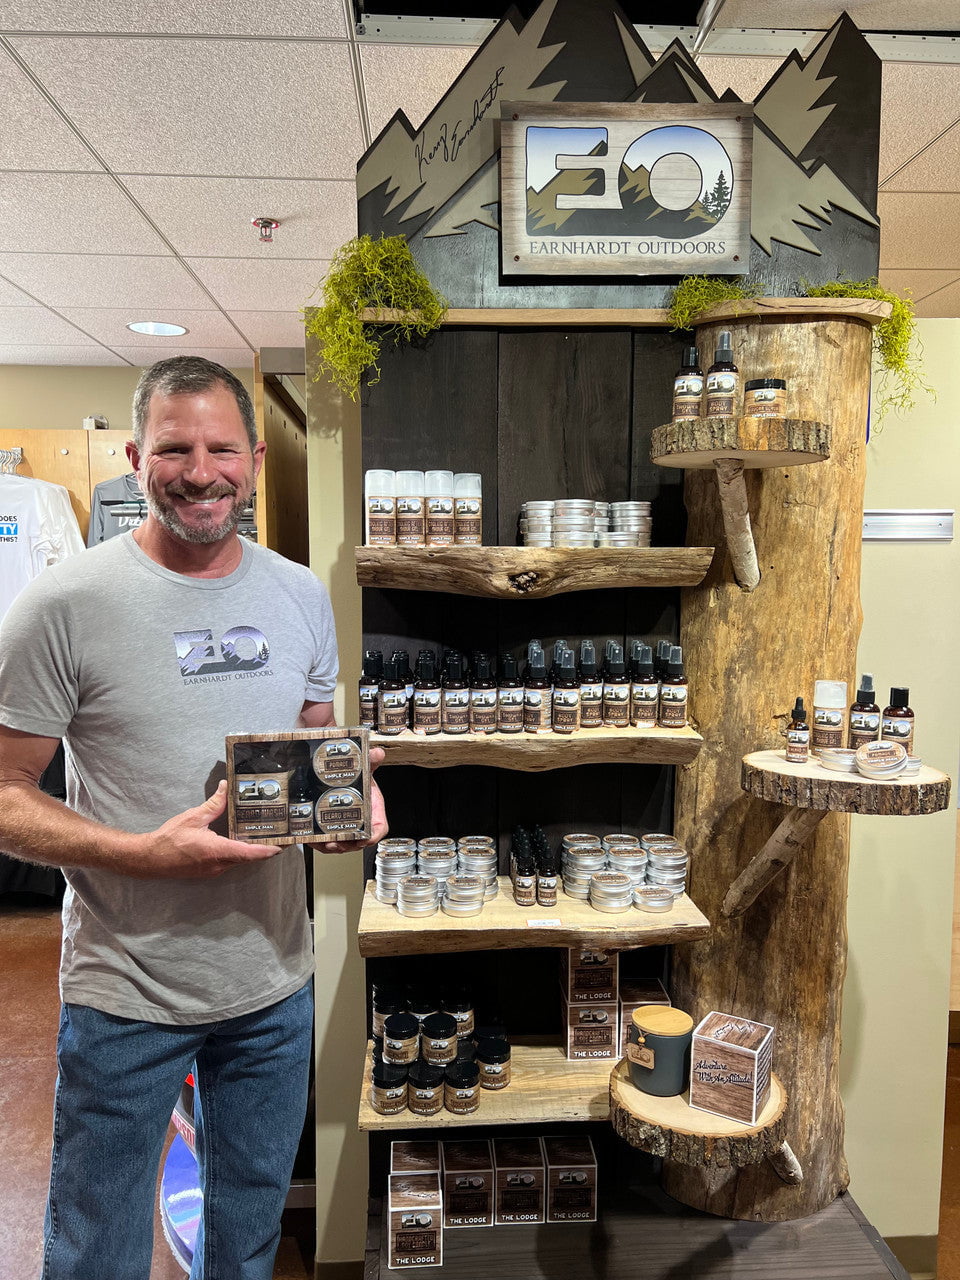 Simple Man Grooming Kit - Earnhardt Outdoors - Old Town Soap Co.